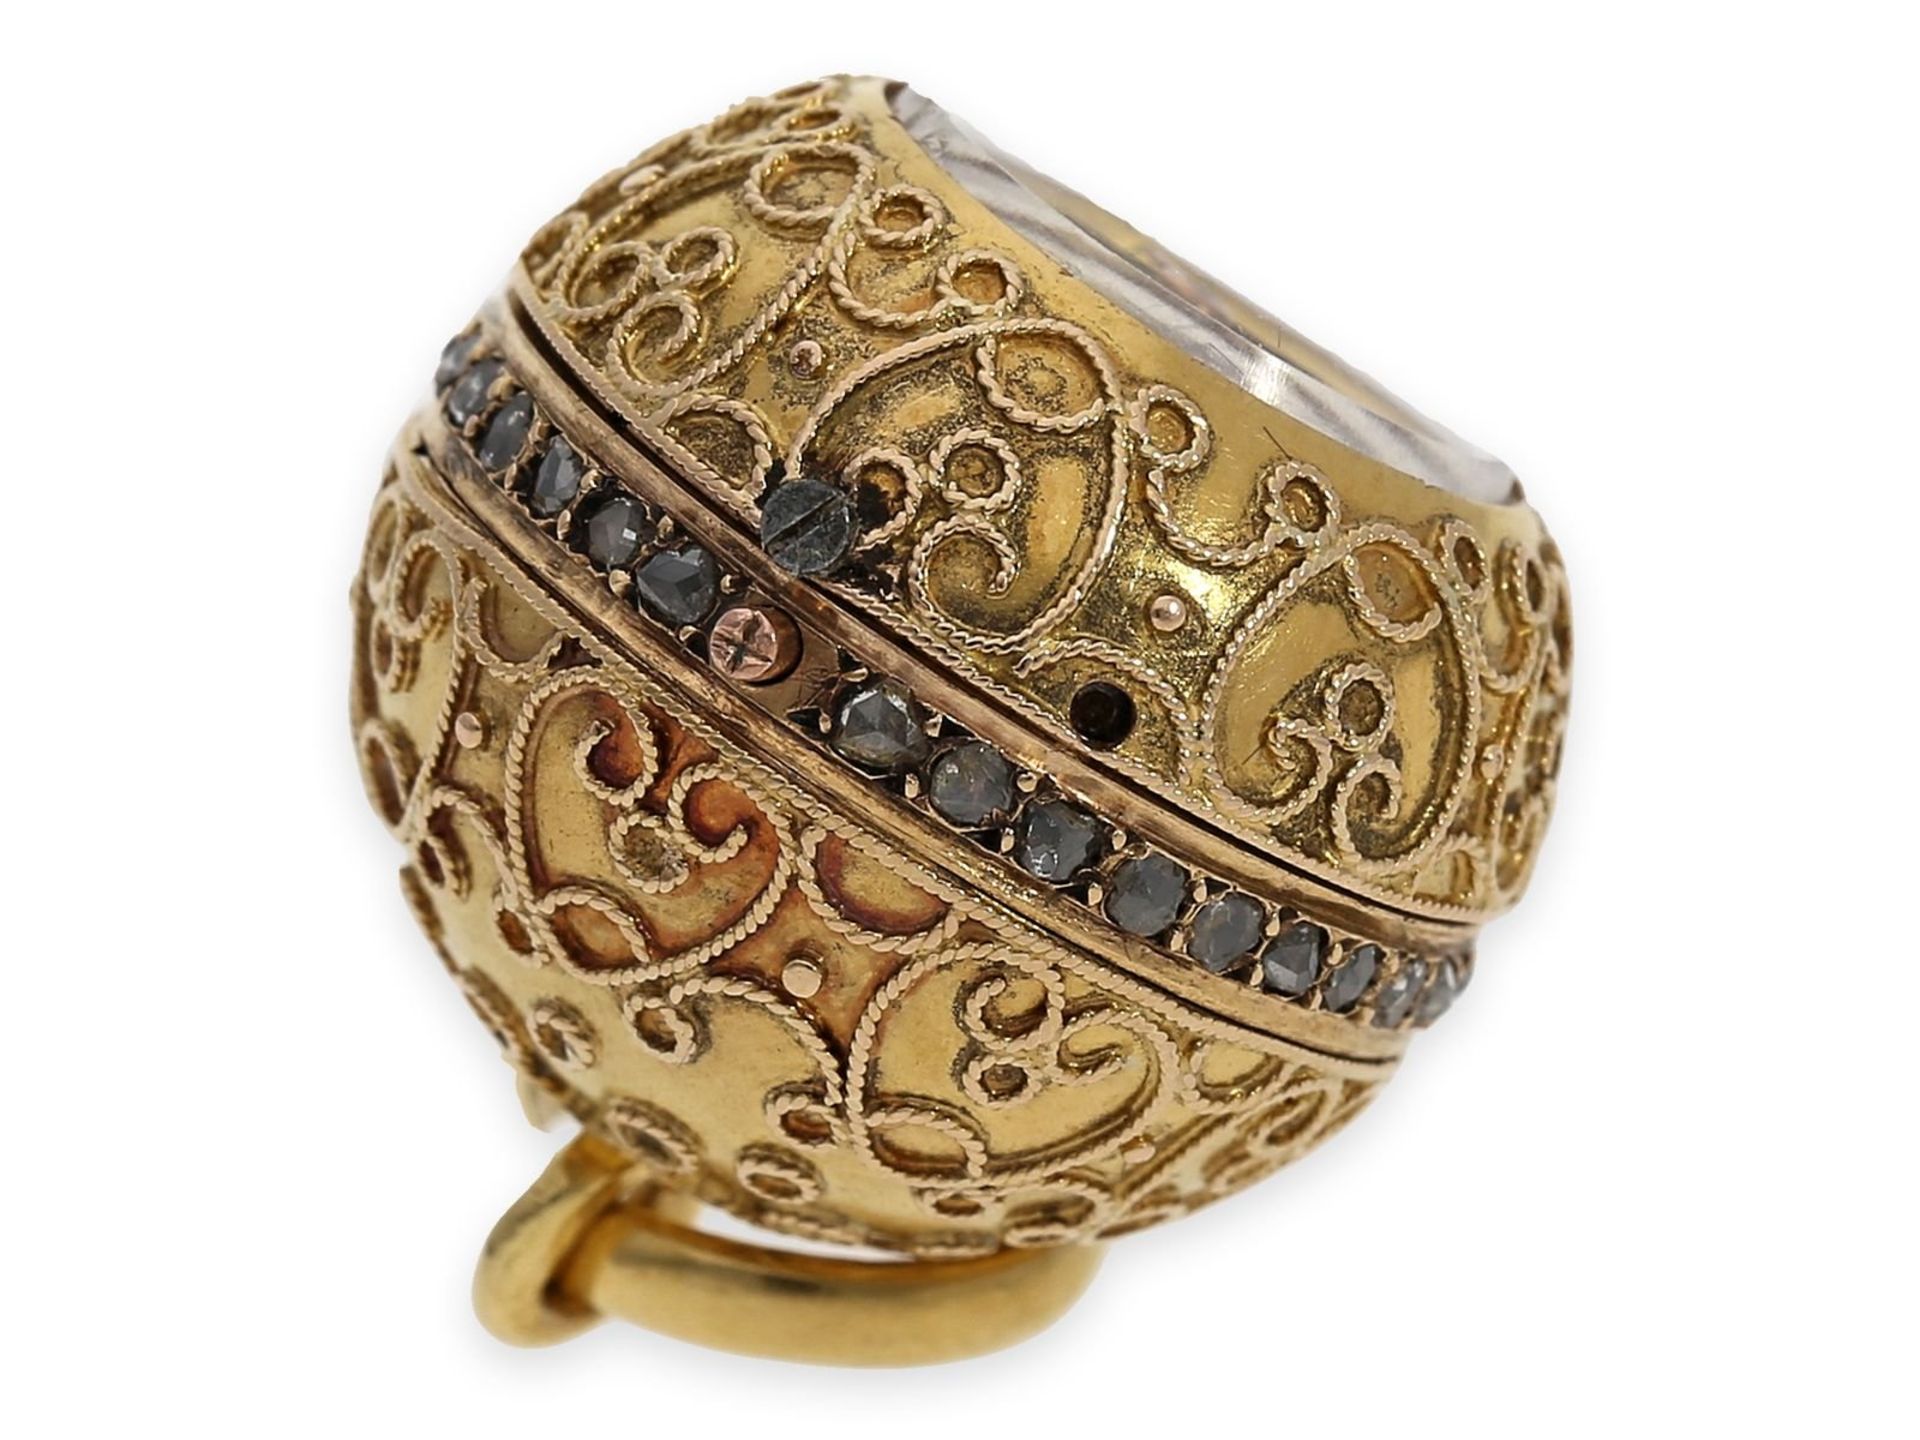 Form watch/ pendant watch: exquisite "Boule de Geneve" ball form watch with granulation and diamond  - Image 4 of 6